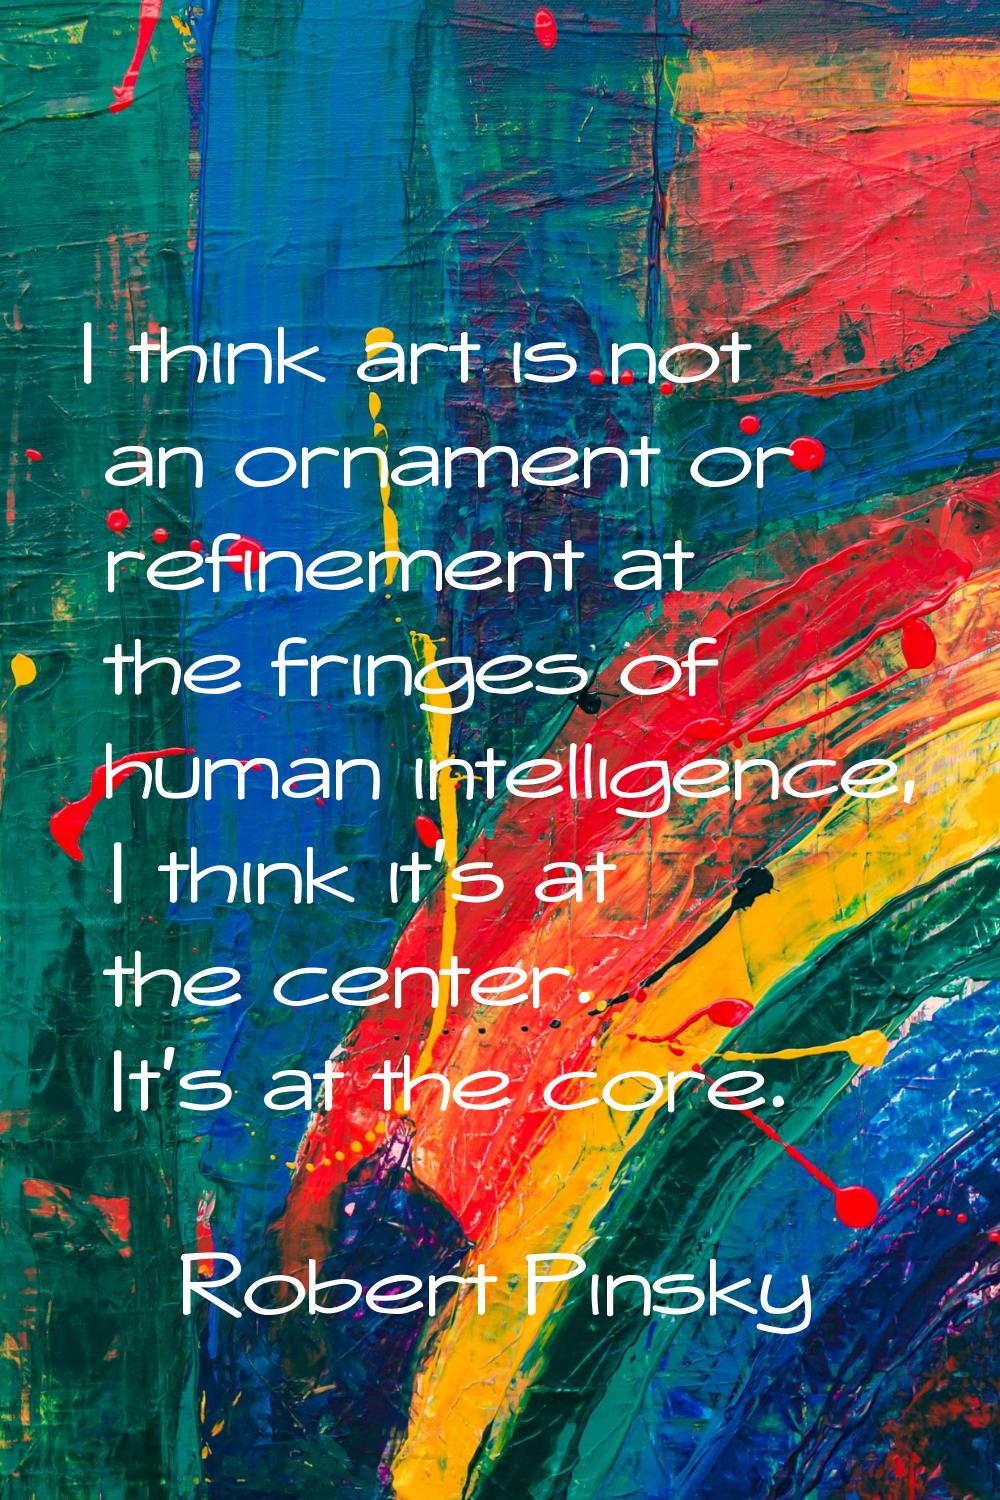 I think art is not an ornament or refinement at the fringes of human intelligence, I think it's at 